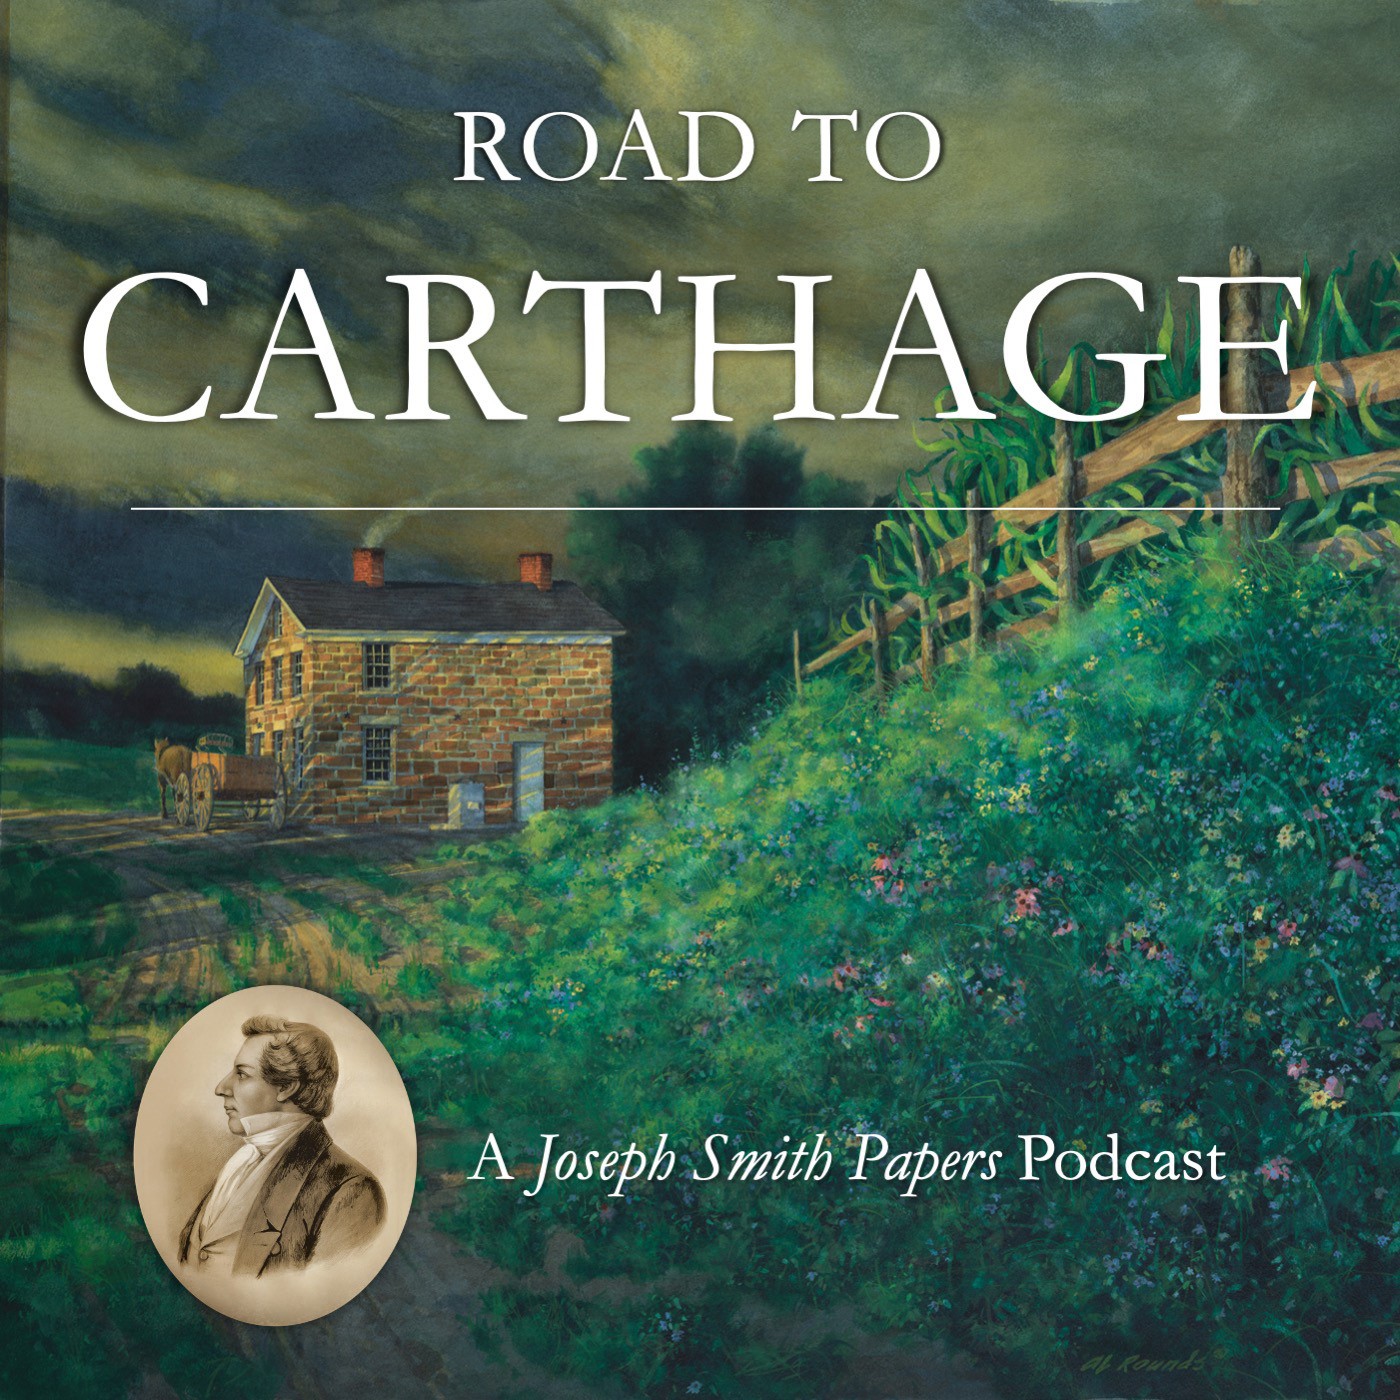 Road to Carthage